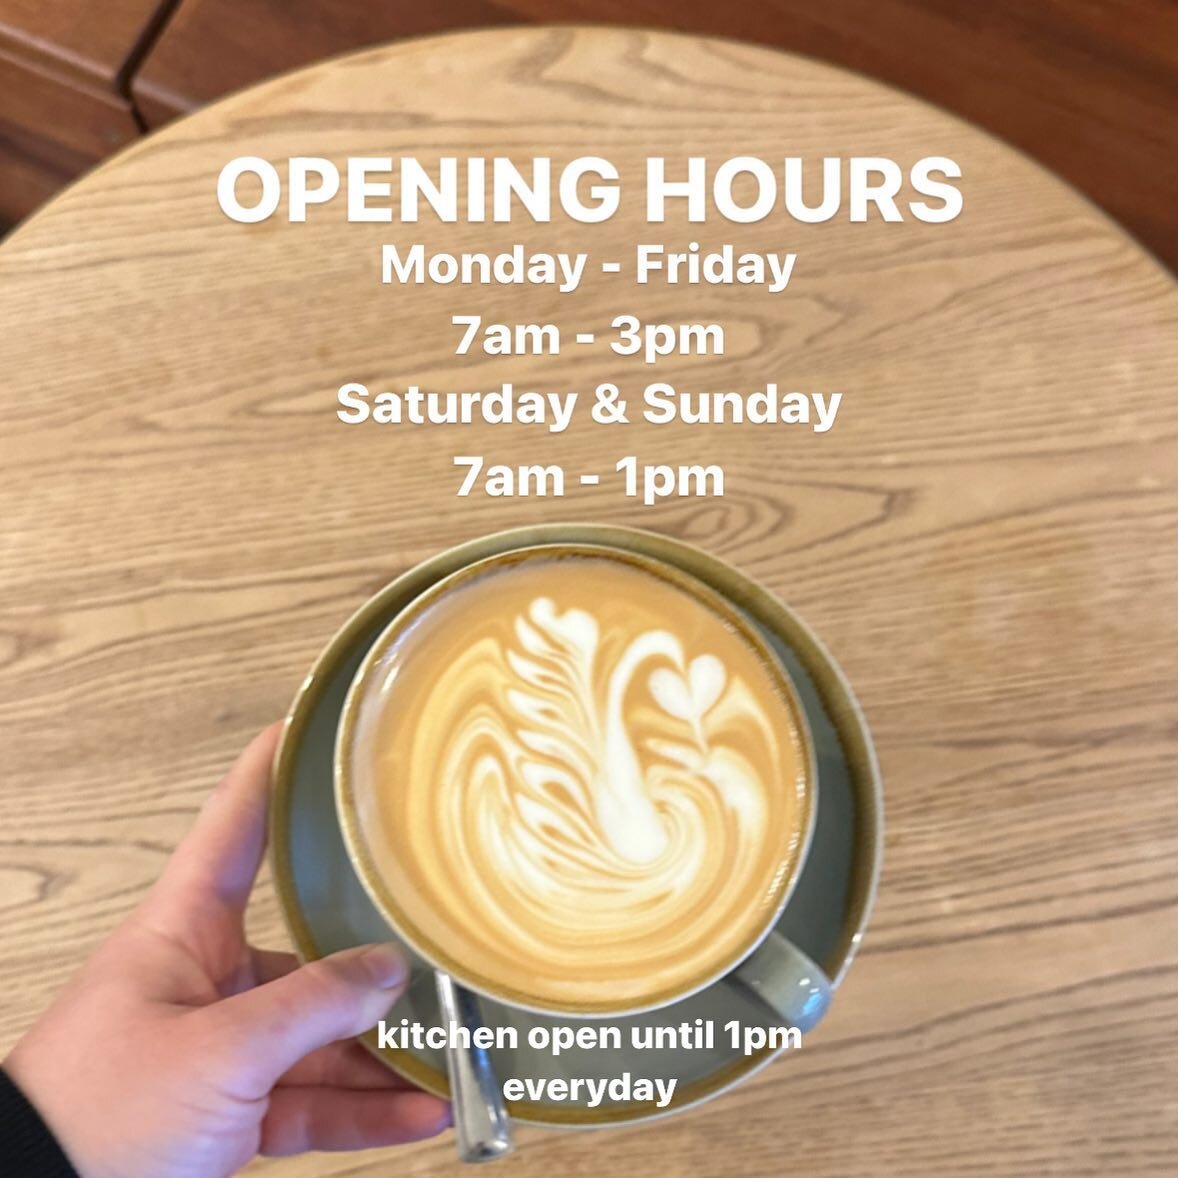 Open at 7am everyday for your caffeine fix and brunch goodness ☕️🍳🥑

#openinghours #cafe #latteart #swanlatteart #portlincoln #eyrepeninsula #supportlocal